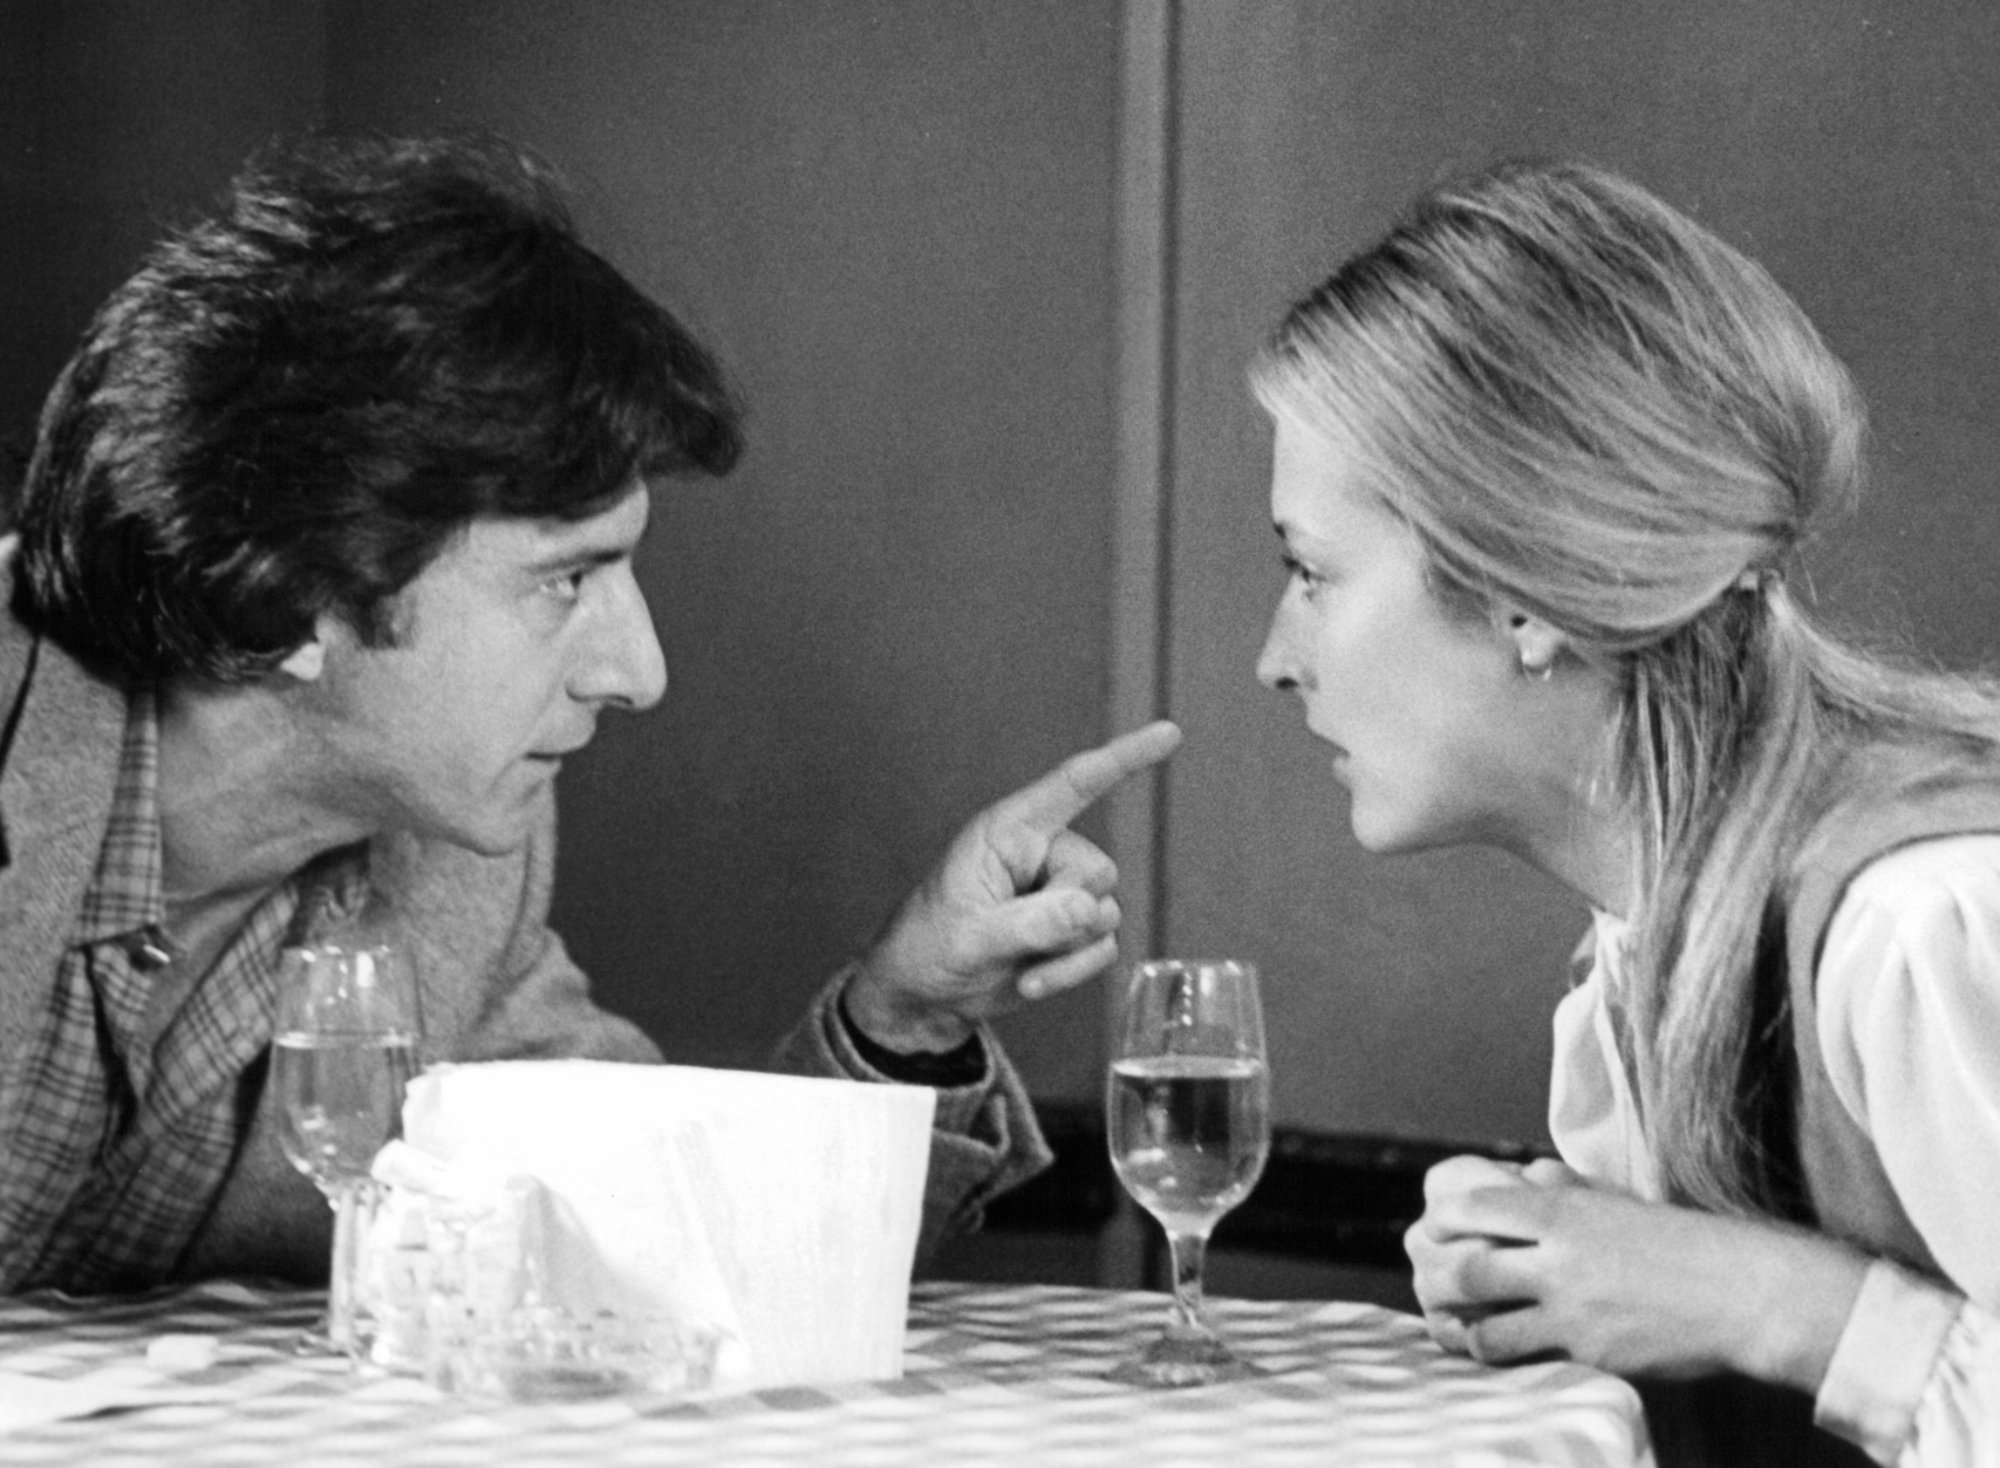 'Kramer vs. Kramer' Dustin Hoffman as Ted Kramer and Meryl Streep as Joanna pointing his finger in her face at a table with water glasses in between them